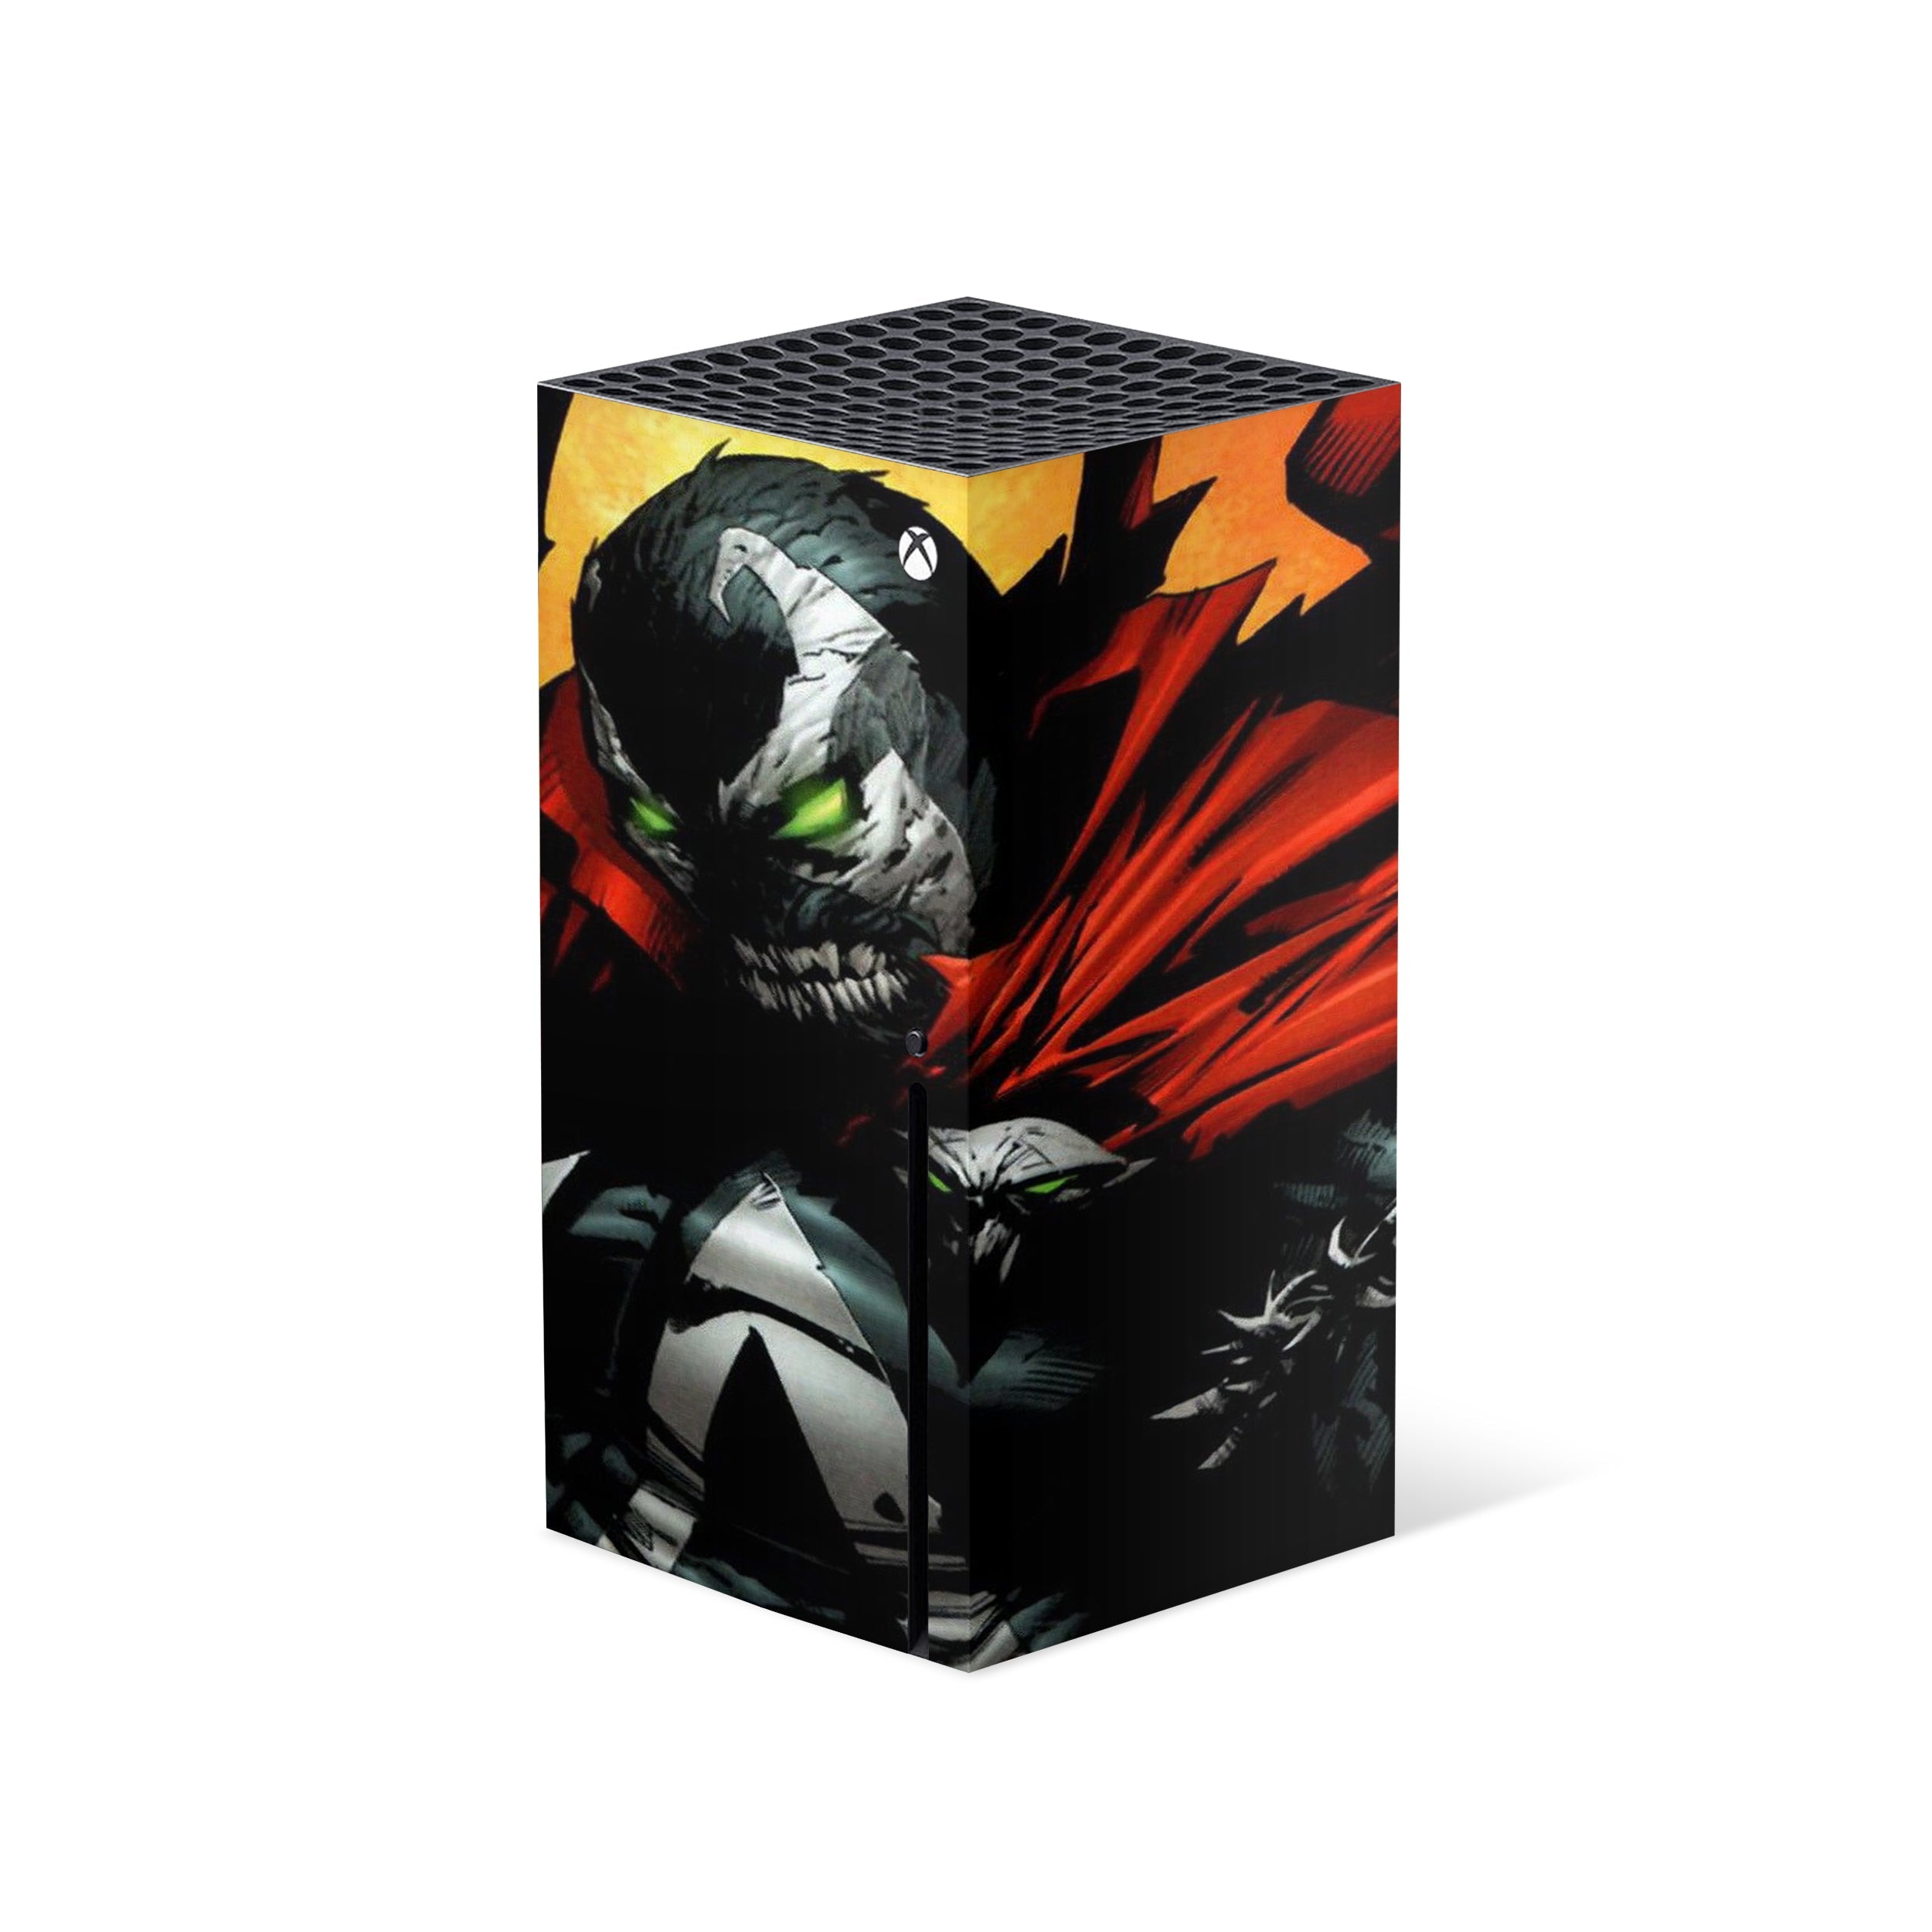 A video game skin featuring a Image Comics Spawn design for the Xbox Series X.